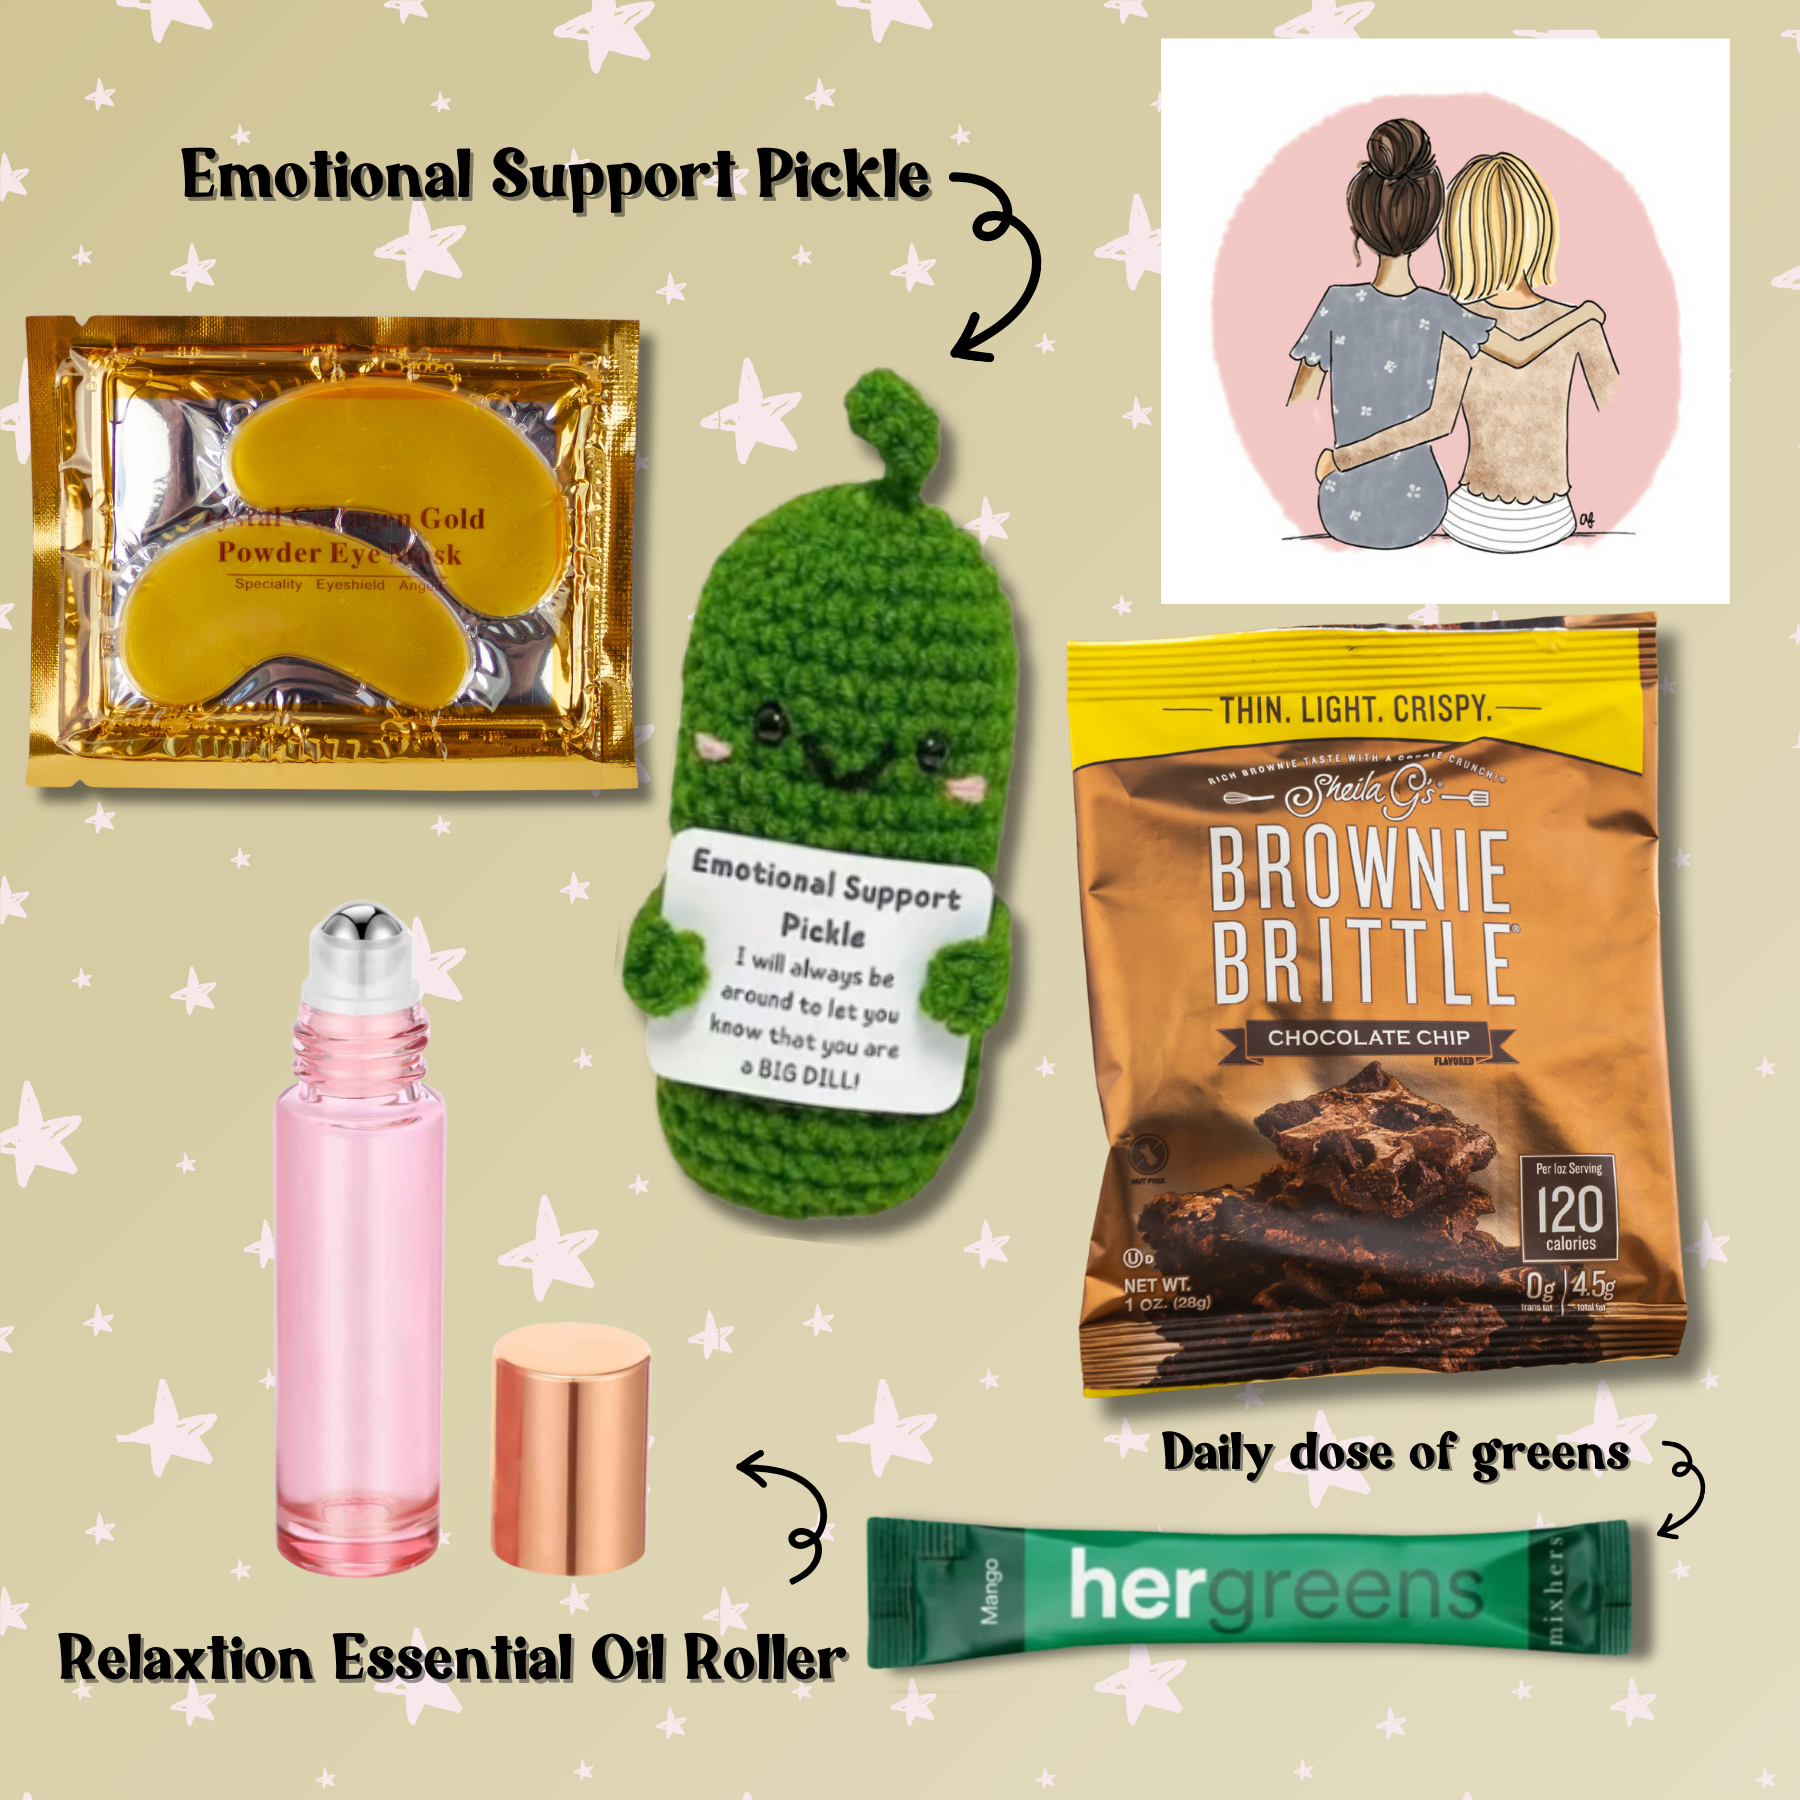 EMOTIONAL SUPPORT BOX